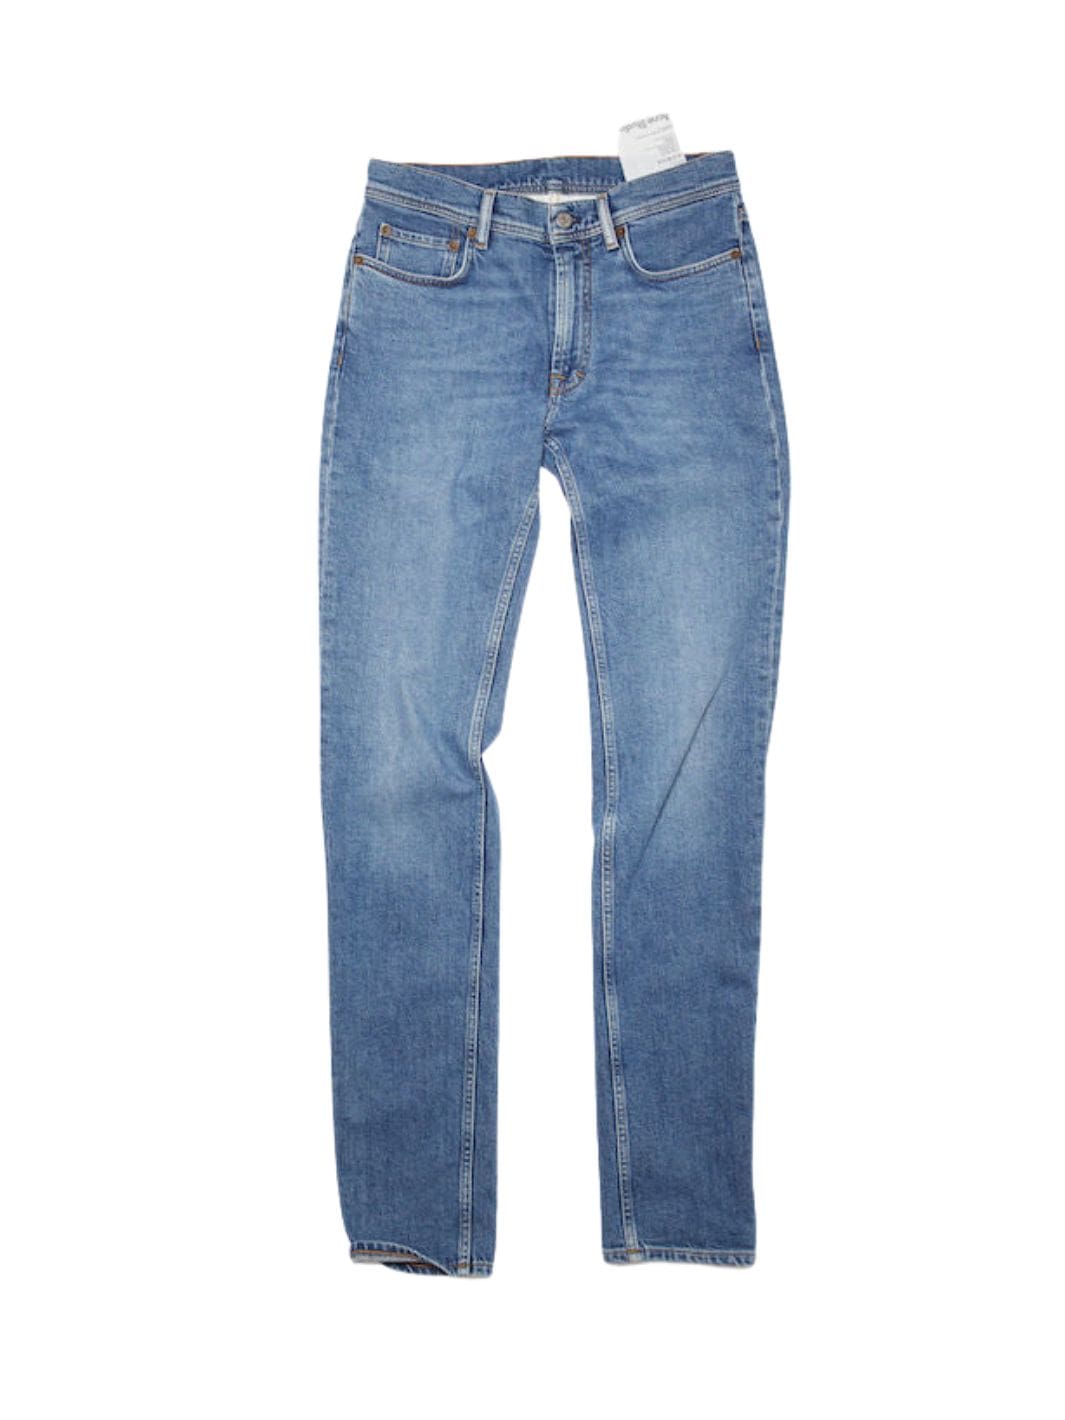 Acne Studios Jeans Jeans | North Mid Blue